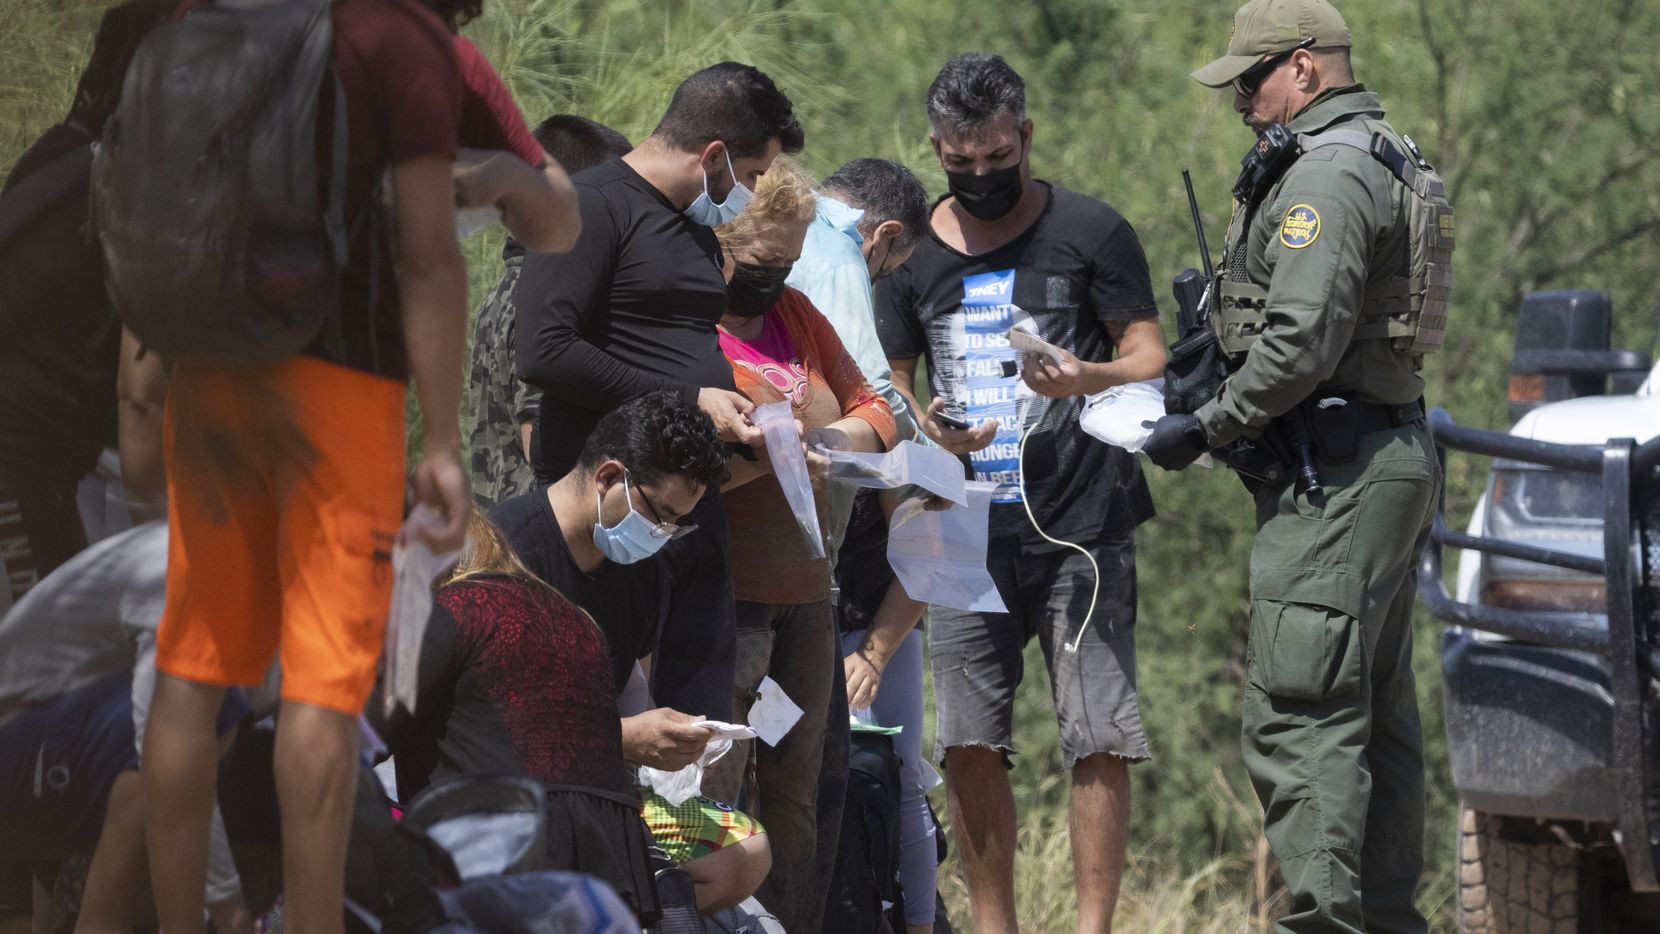 A group of mostly Cuban migrants are handed bags for their belongings by Border Patrol...